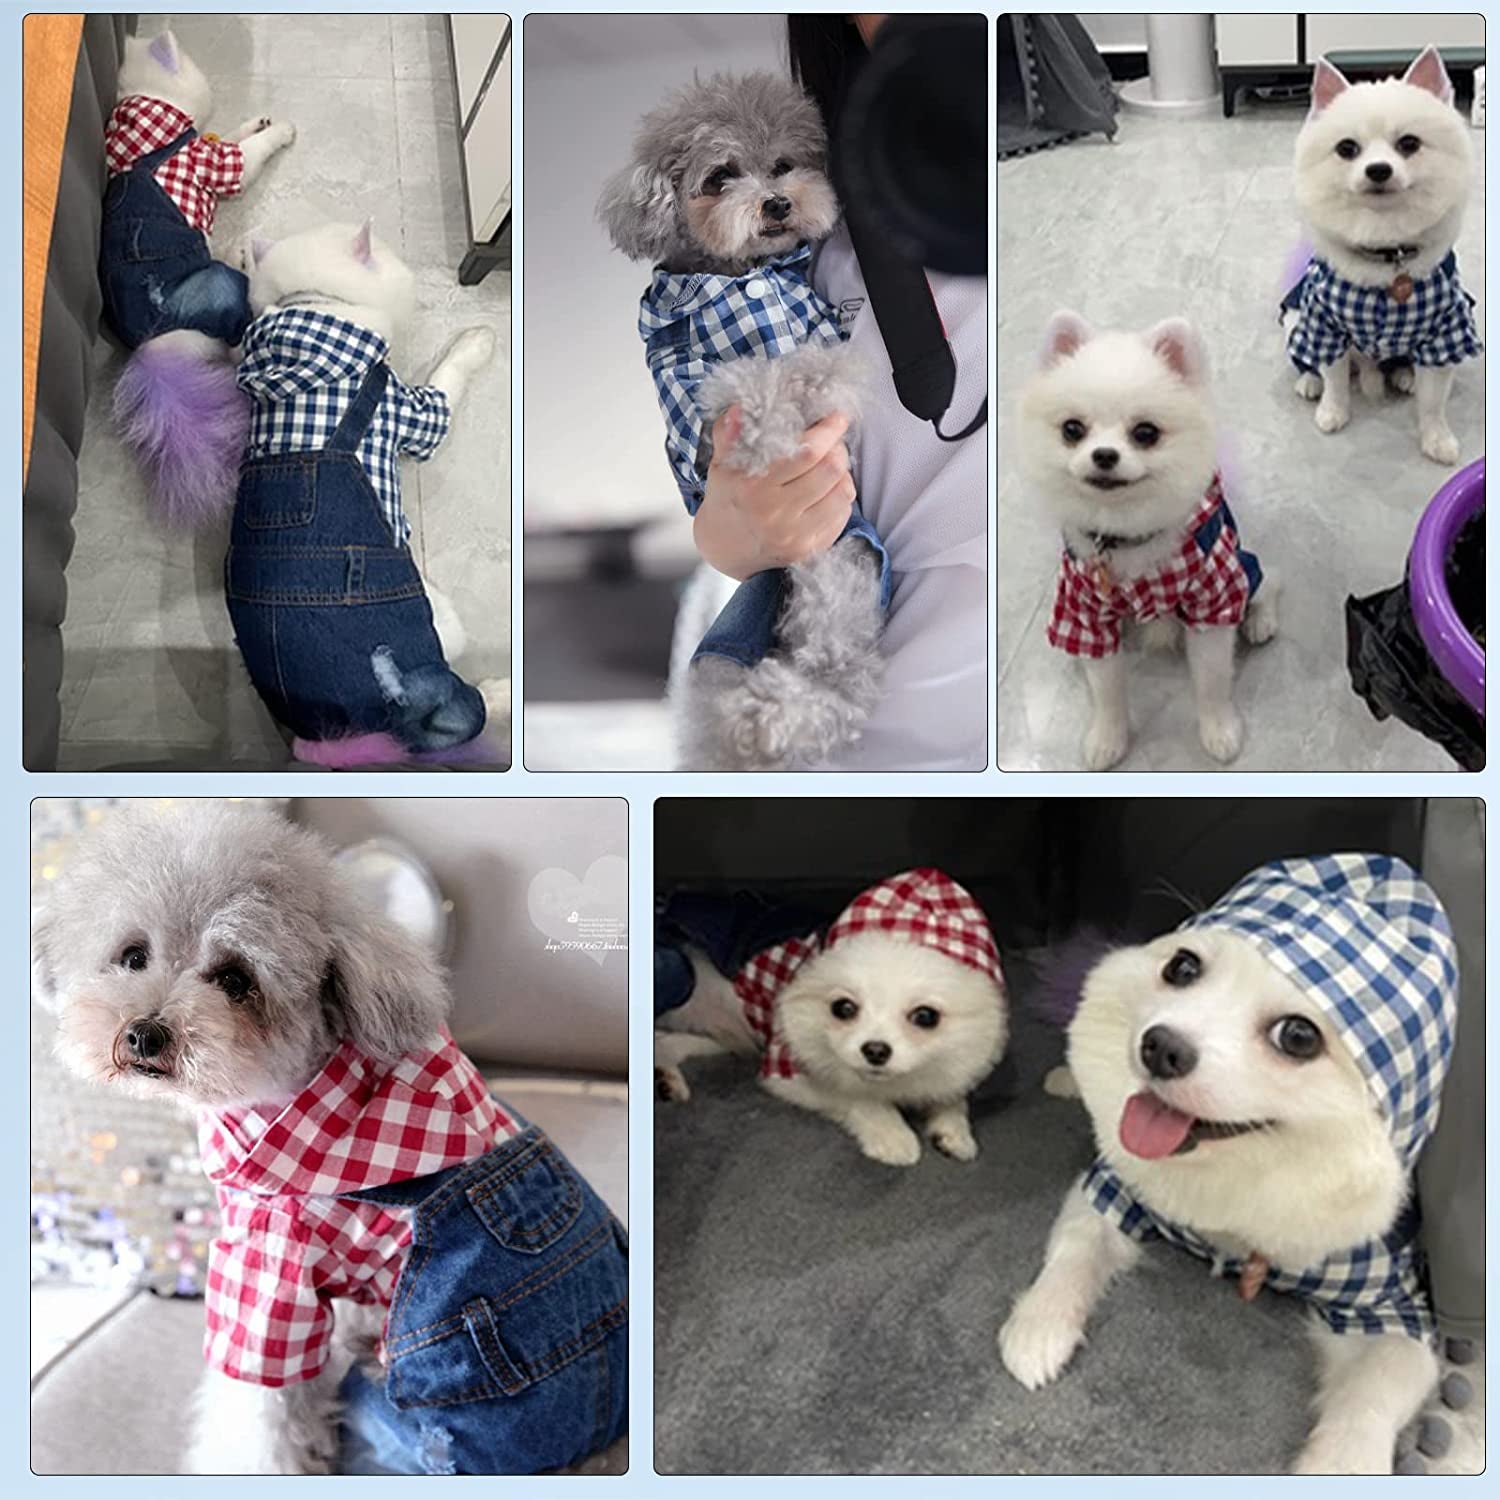 PETCARE Pet Dog Denim Jumpsuit Plaid Hoodies Puppy Overalls Doggy Jeans Jacket Clothes for Small Dogs Cats Chihuahua Yorkie Spring Summer Costume Outfit